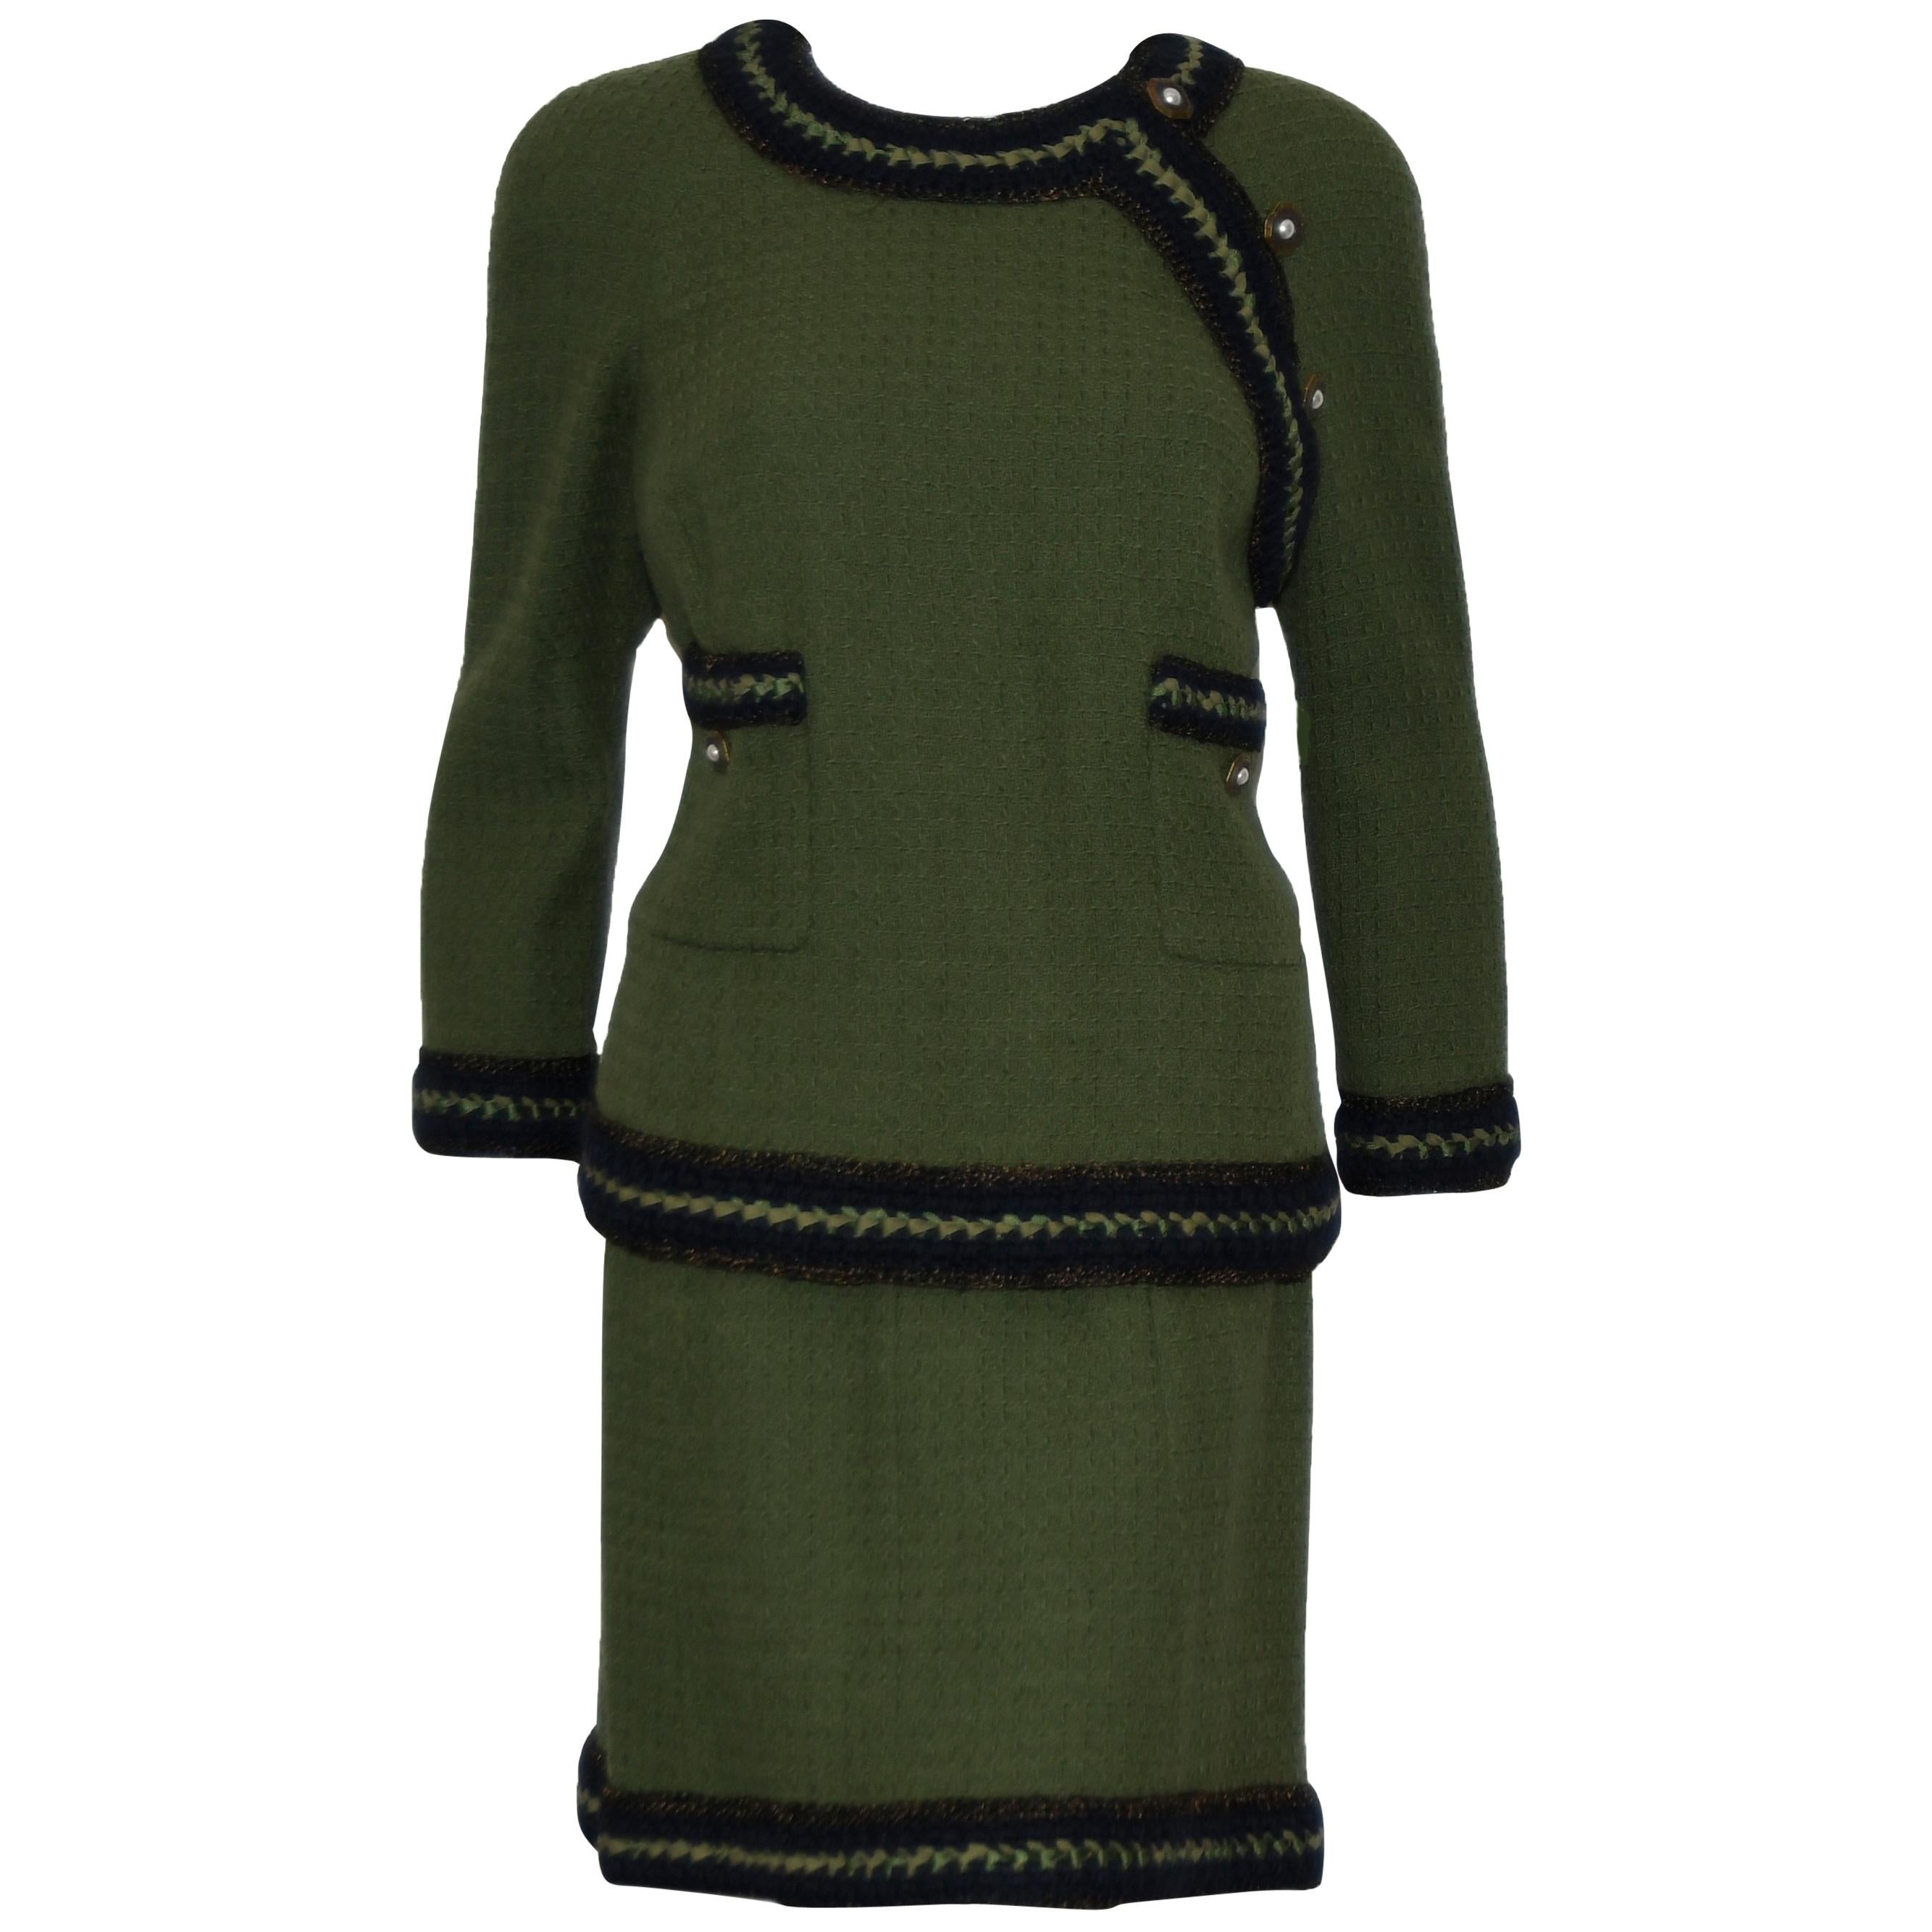 Chanel Olive Green Skirt Suit w/ Navy Blue Trim